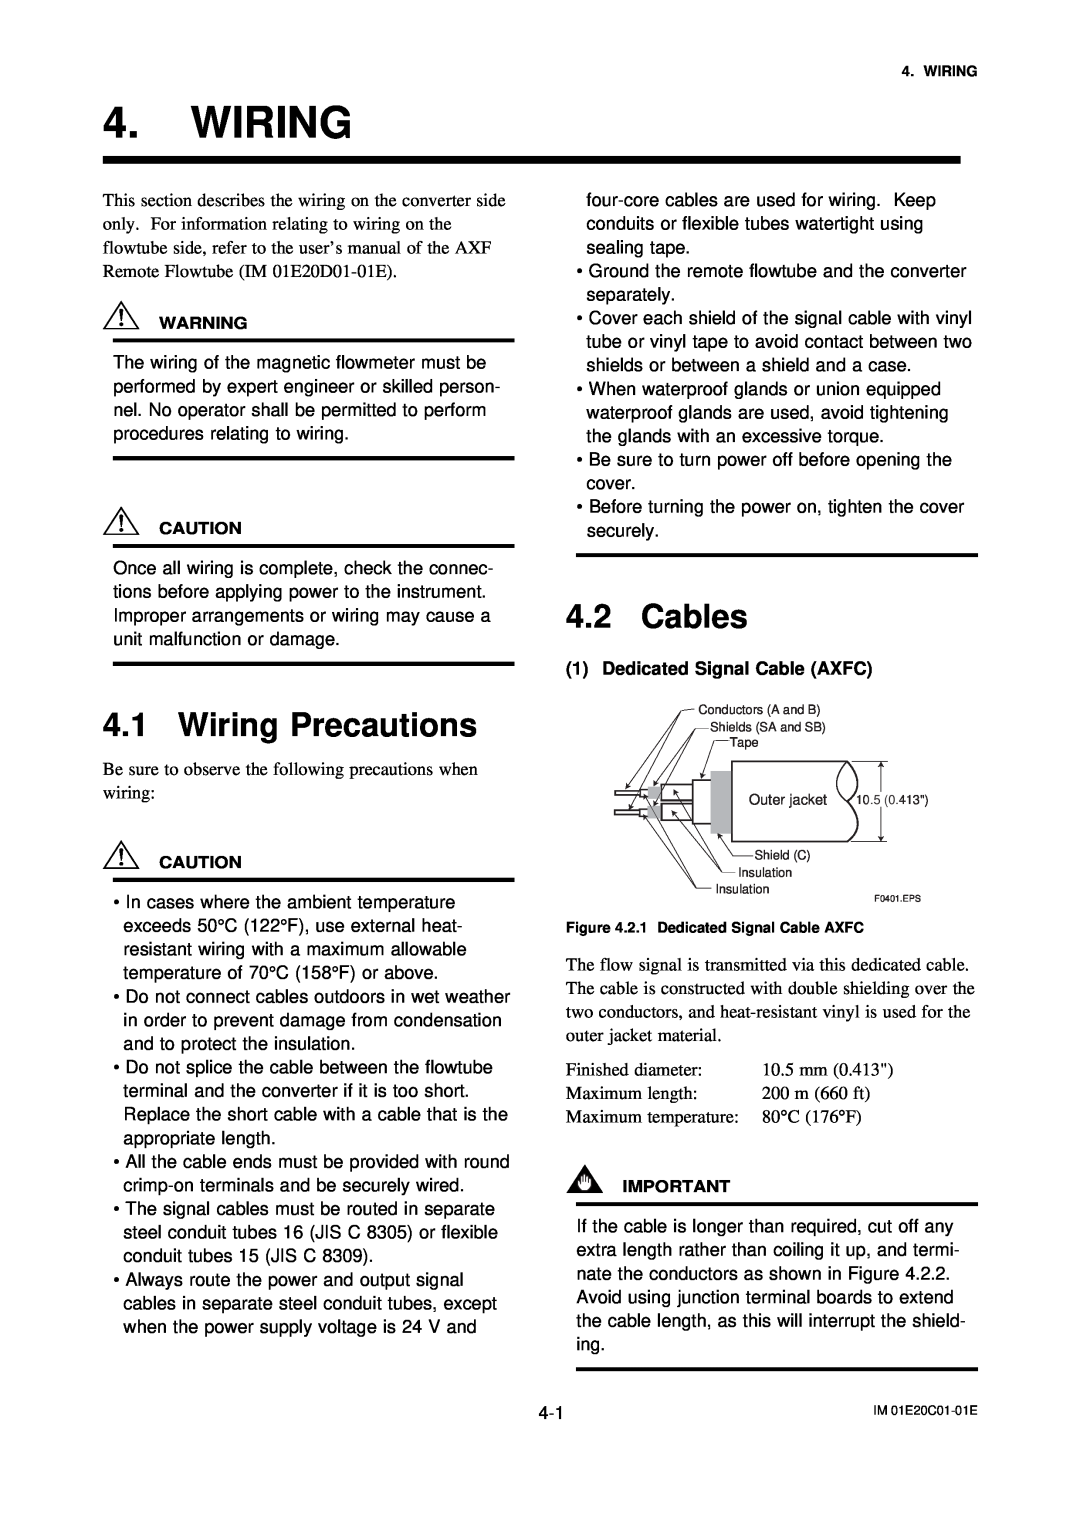 APC AXFA11G user manual Wiring Precautions, Cables, Dedicated Signal Cable AXFC 